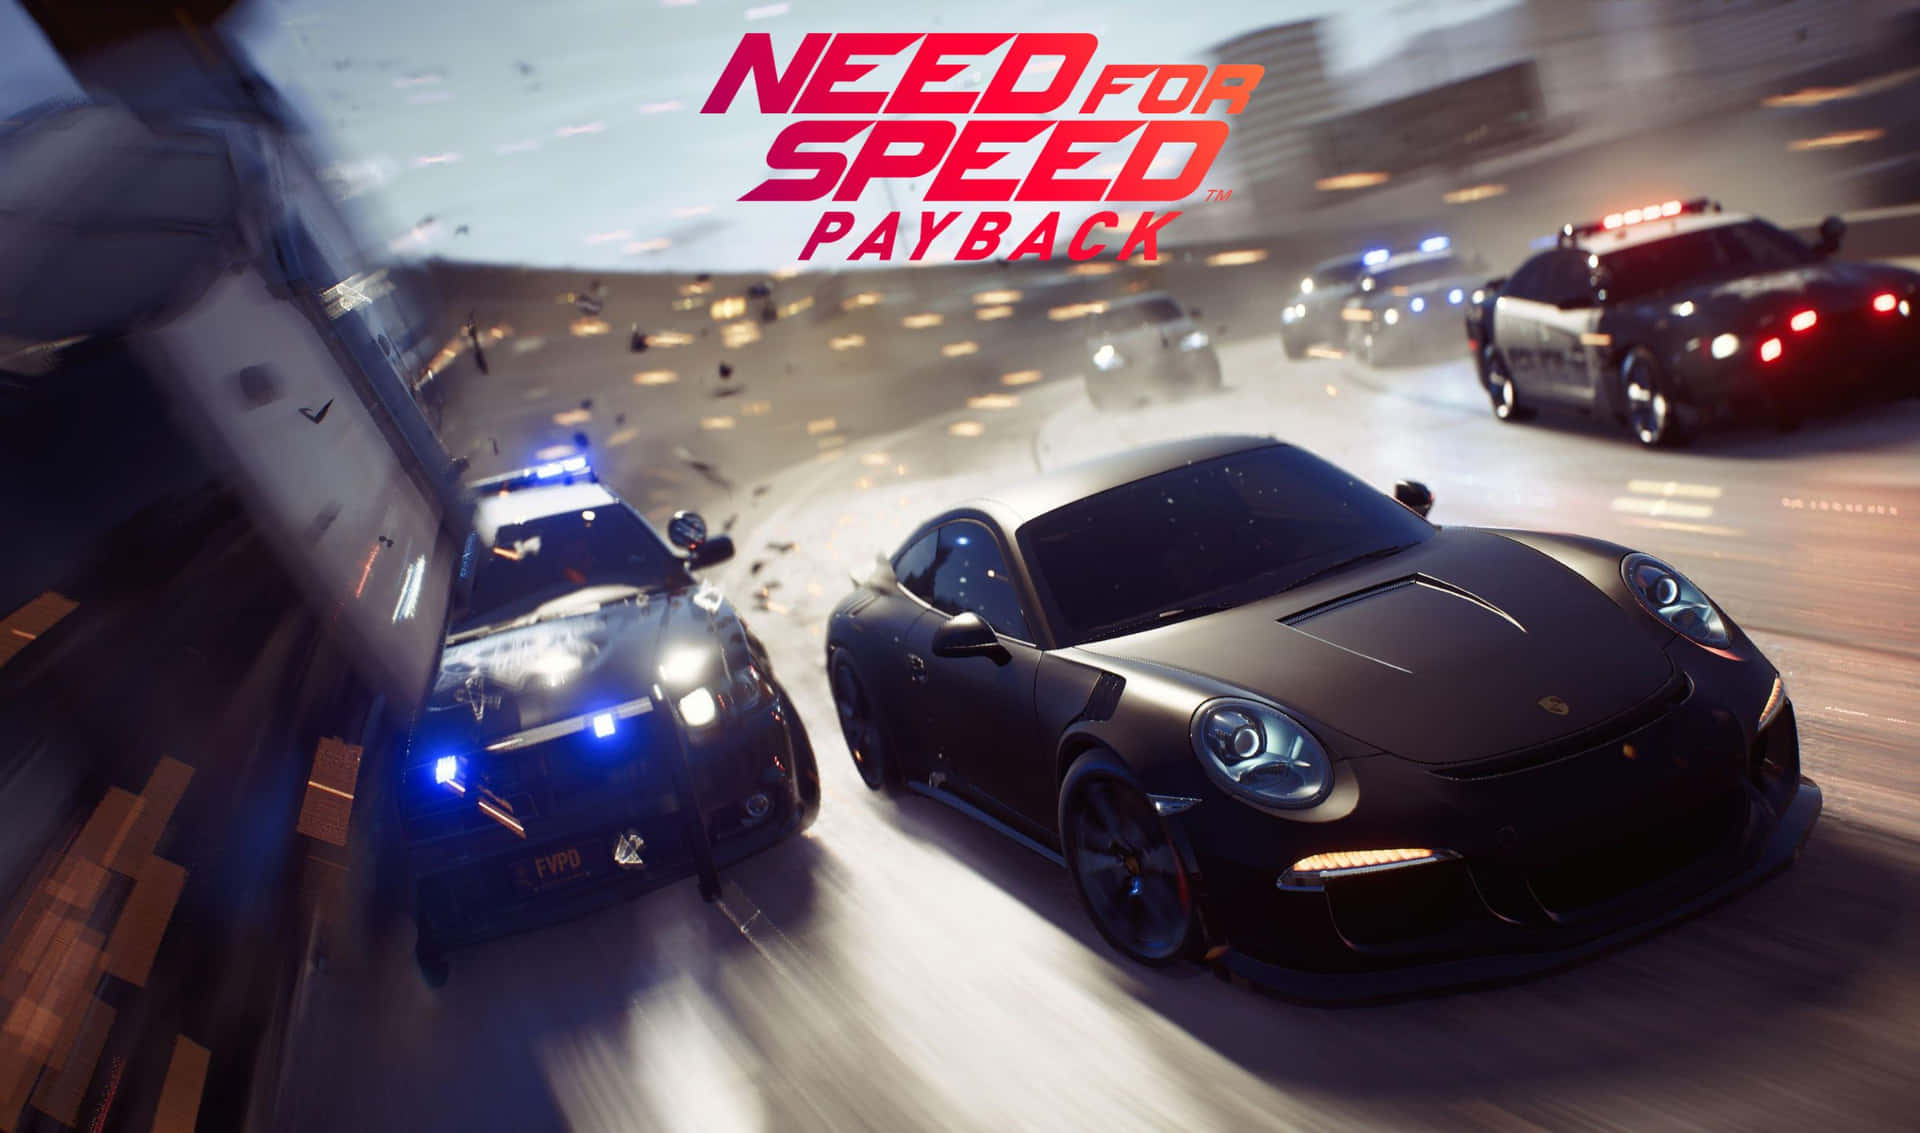 Sientela Adrenalina Con Need For Speed Payback